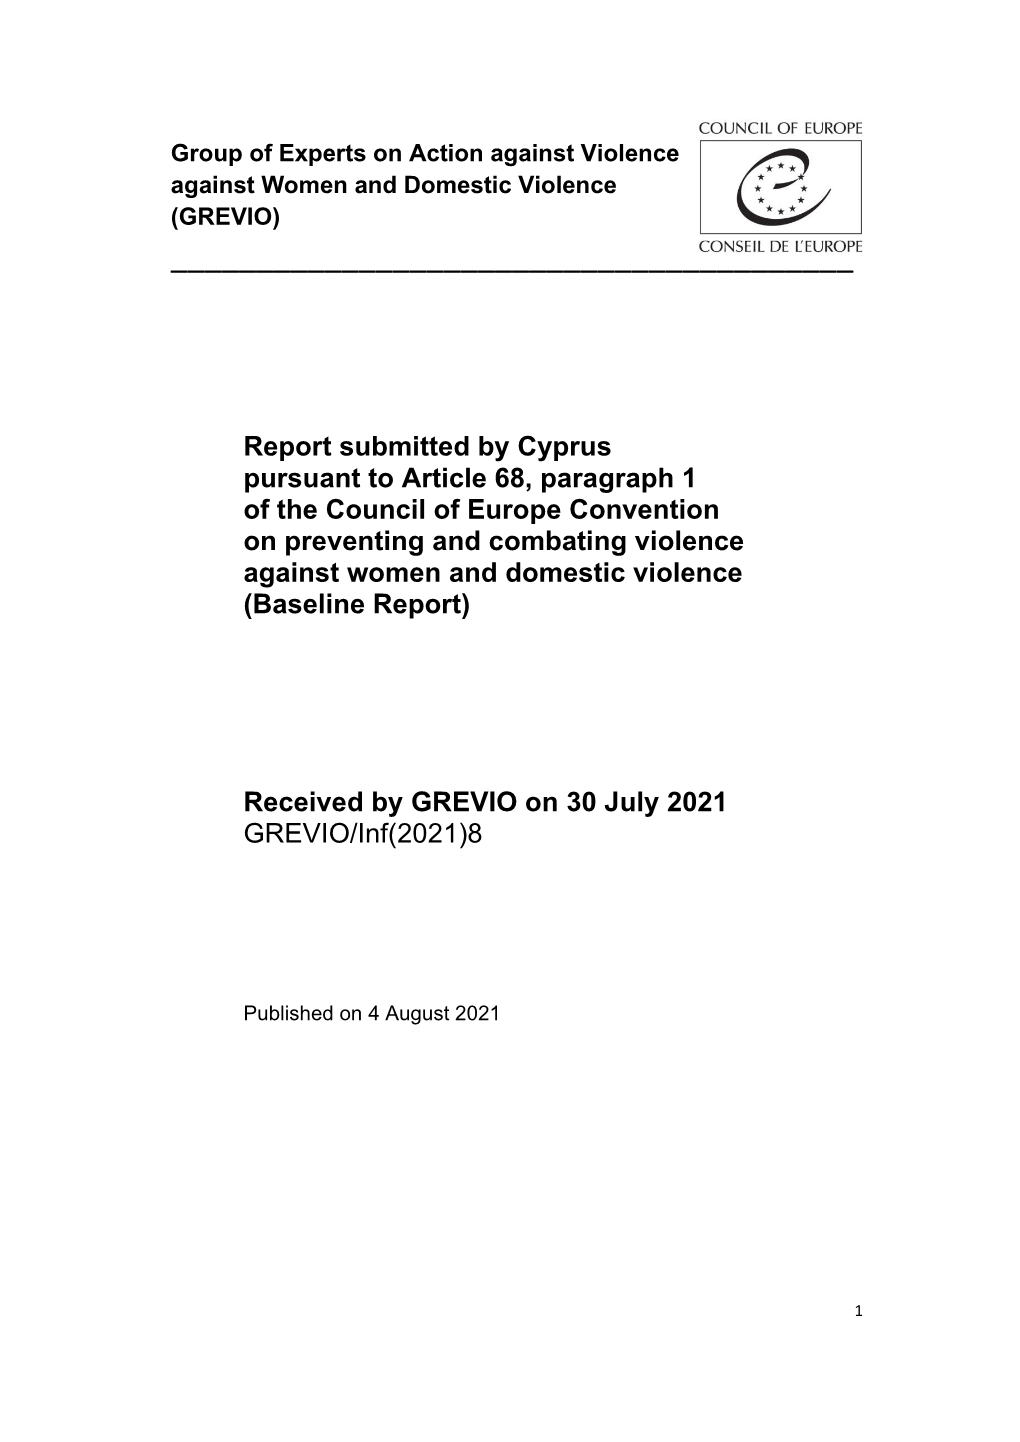 Report Submitted by Cyprus Pursuant to Article 68, Paragraph 1 of The